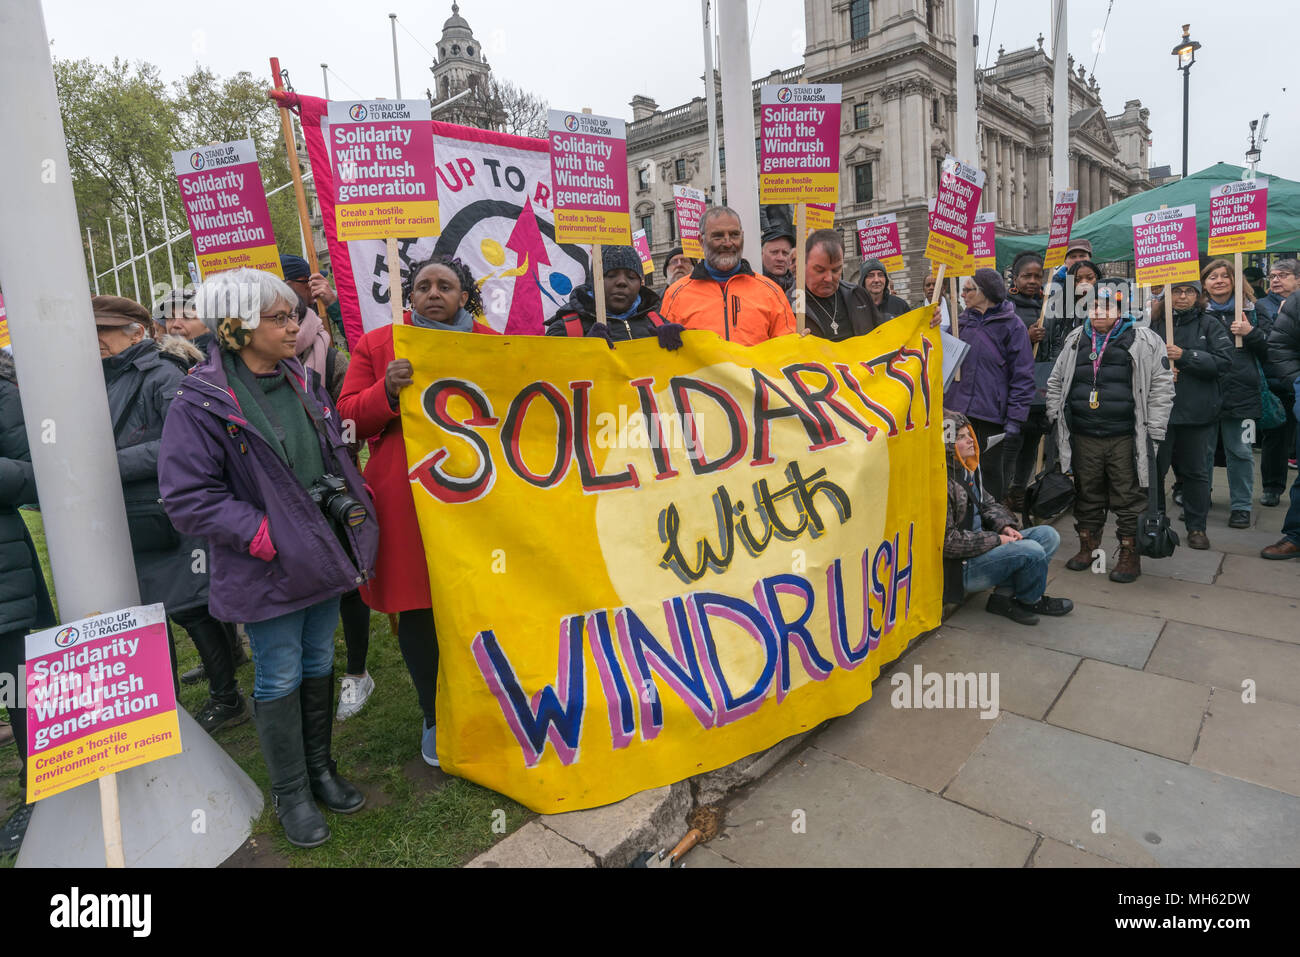 London, UK. 30th April 2018.  People hold the 'Solidarity With Windrush' banner at the protest in support of the petition calling for an end to the deportations of migrants in the 'Windrush generation' who arrived in Britain between 1948 and 1971. It calls on the government to change the burden of proof which means they are now required to prove their right to remain, and to provide compensation for any loss and hurt.. re for many years, paying taxes and raising famil Credit: Peter Marshall/Alamy Live News Stock Photo